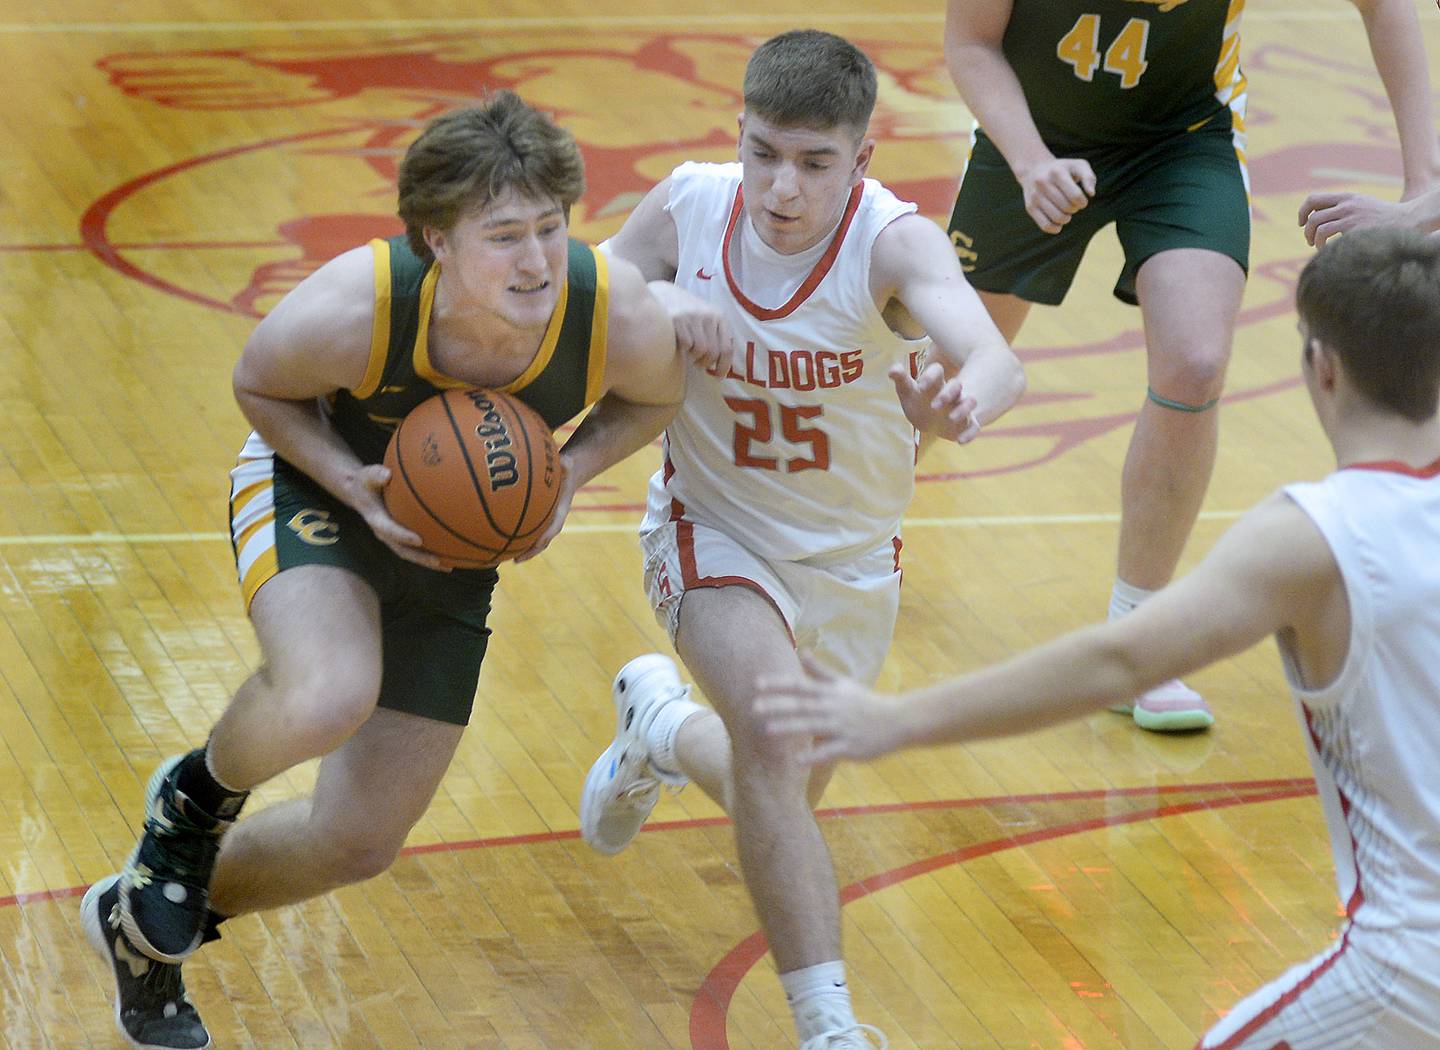 Coal City’s Carson Headley works to get to the basket past Streator’s Cade Peterson in the 2nd period on Tuesday, Jan. 31, 2023 at Streator High School.